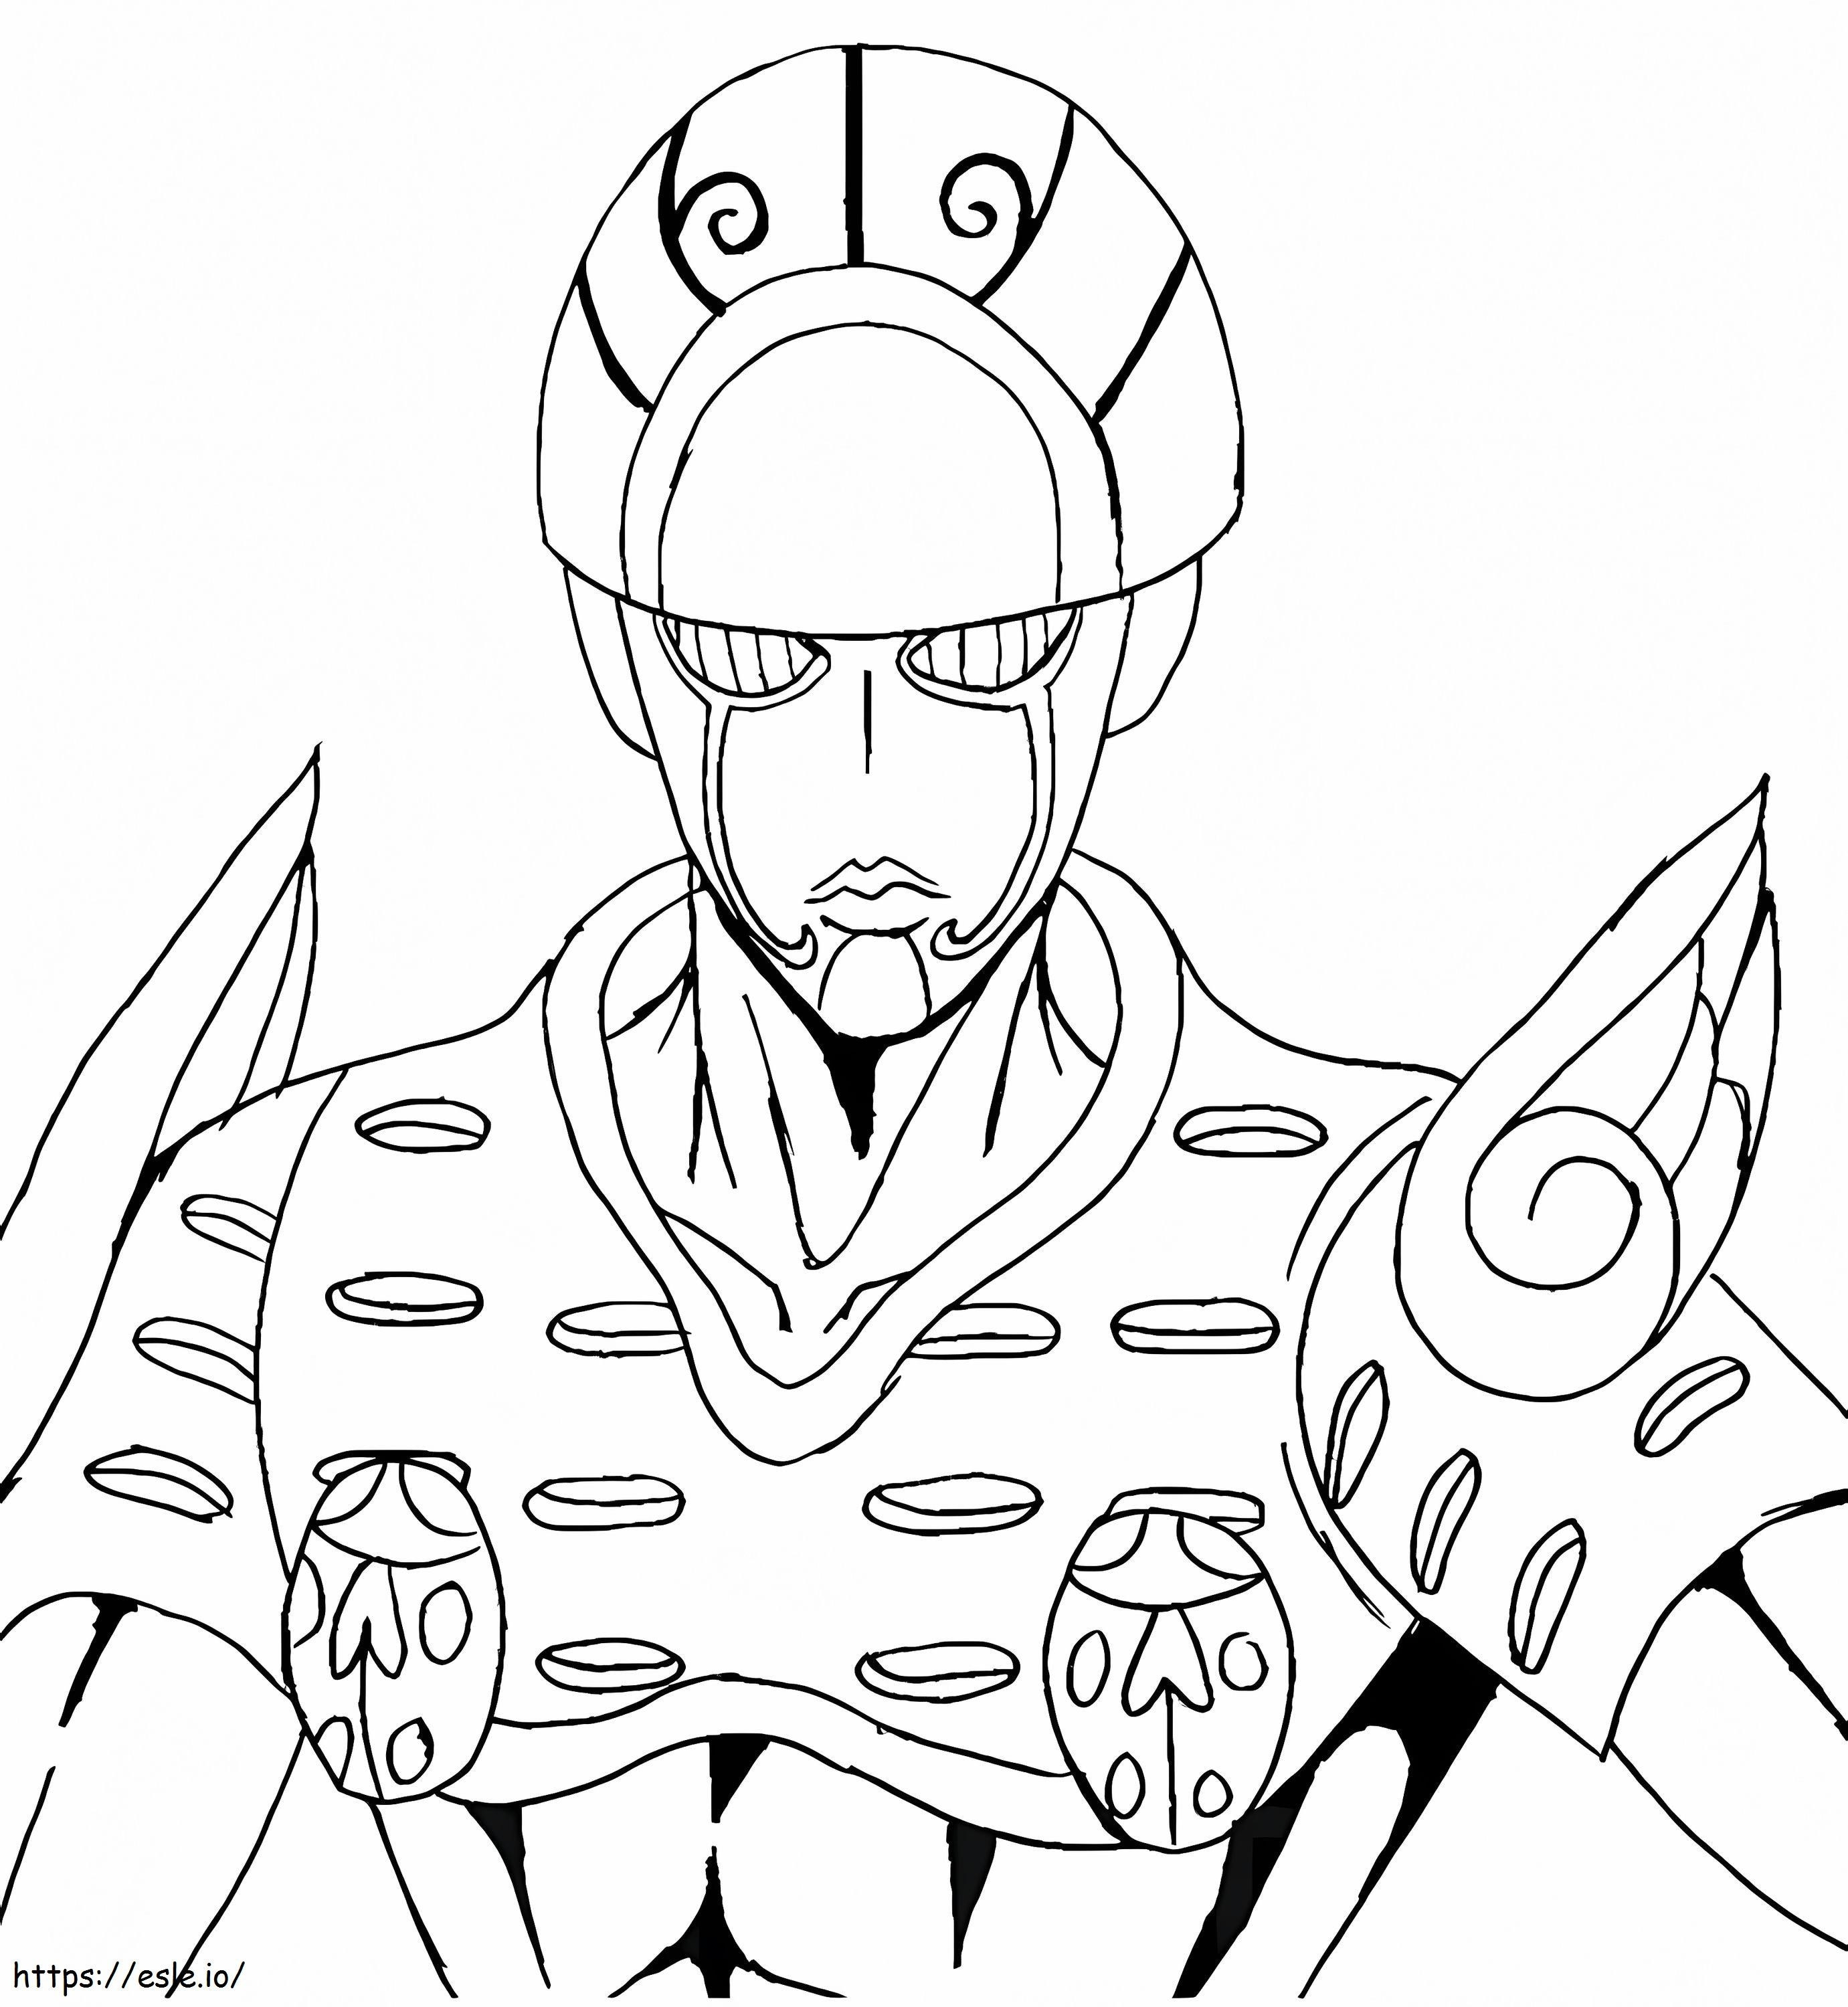 Gold Experience From Jojos Bizarre Adventure coloring page